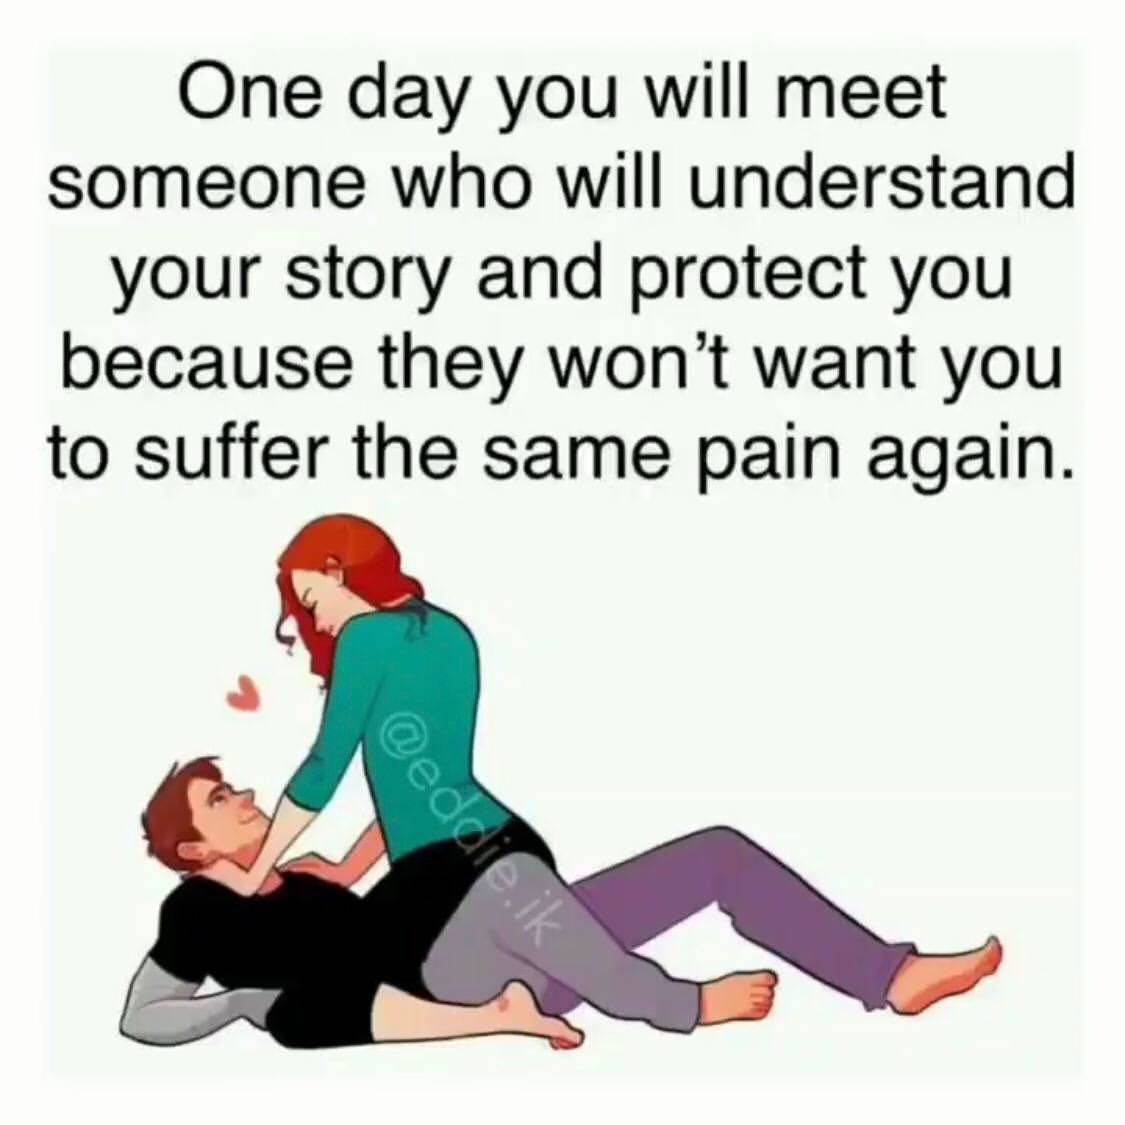 One day you will meet someone who will understand your story and protect you because they won't want you to suffer the same pain again.